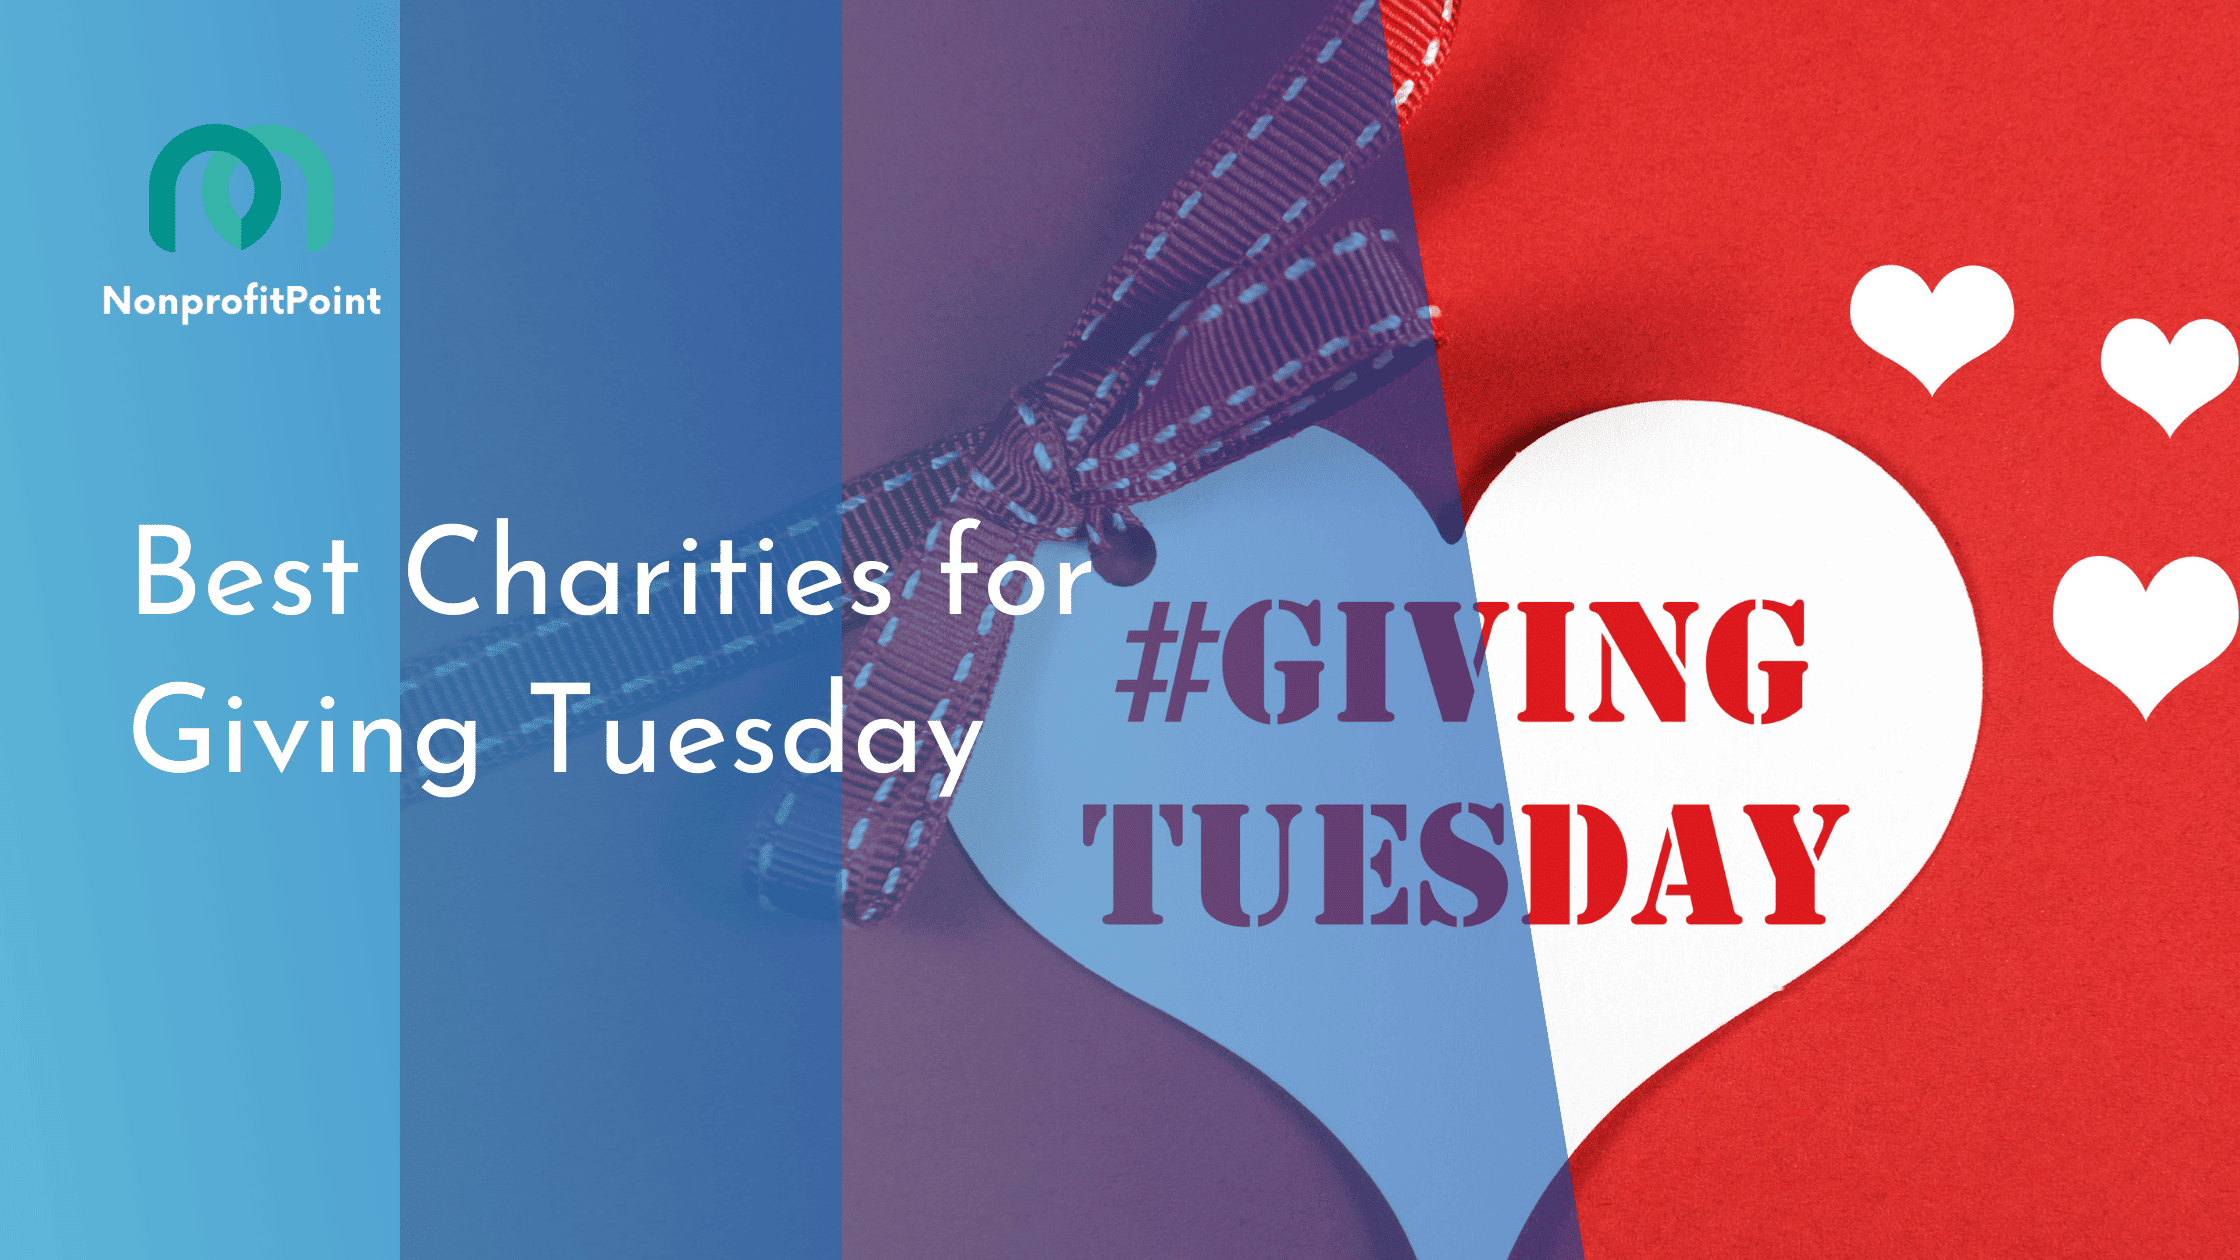 Best Charities for Giving Tuesday